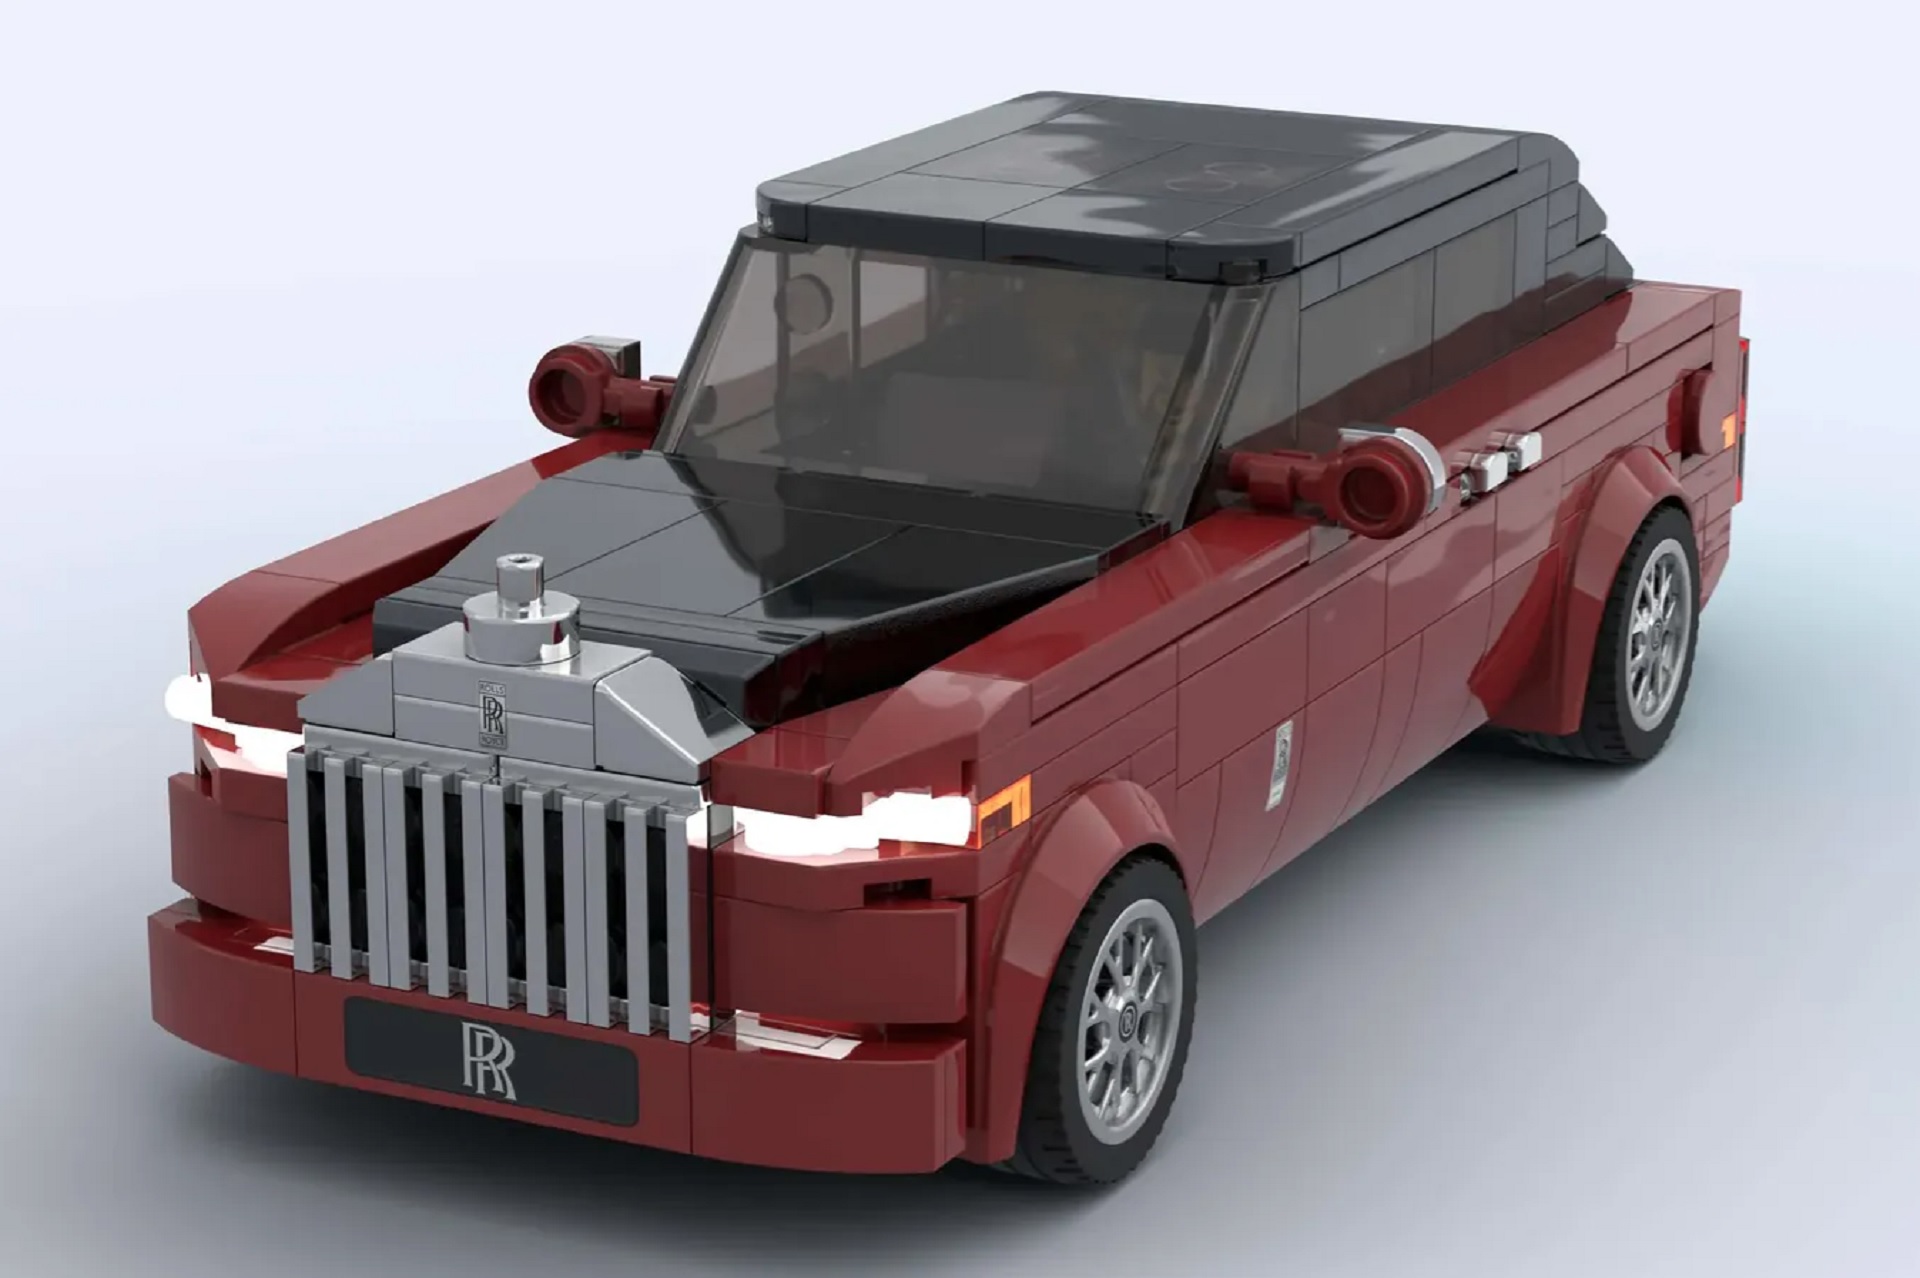 LEGO Model of the Rolls Royce Phantom VIII Reminds You What Luxury Is 